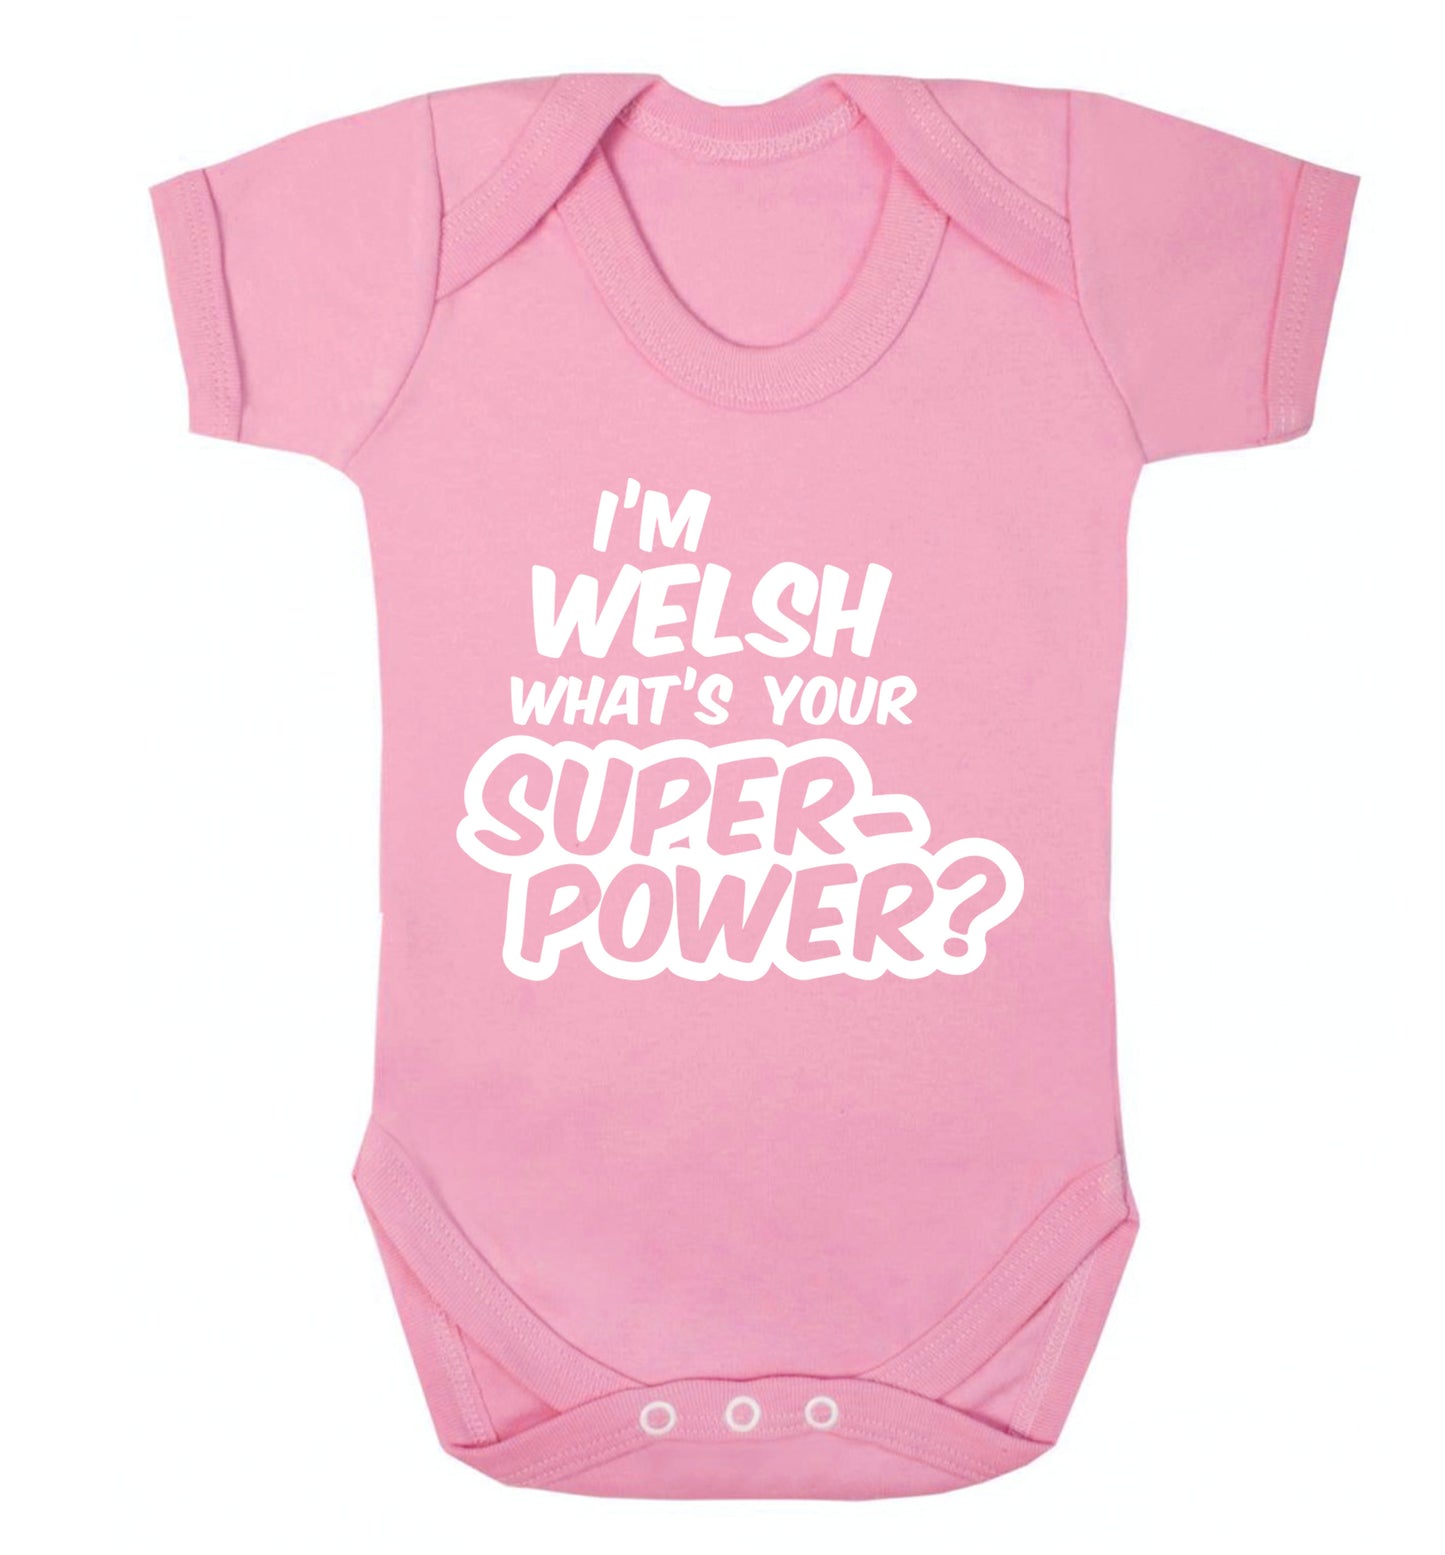 I'm Welsh what's your superpower? Baby Vest pale pink 18-24 months